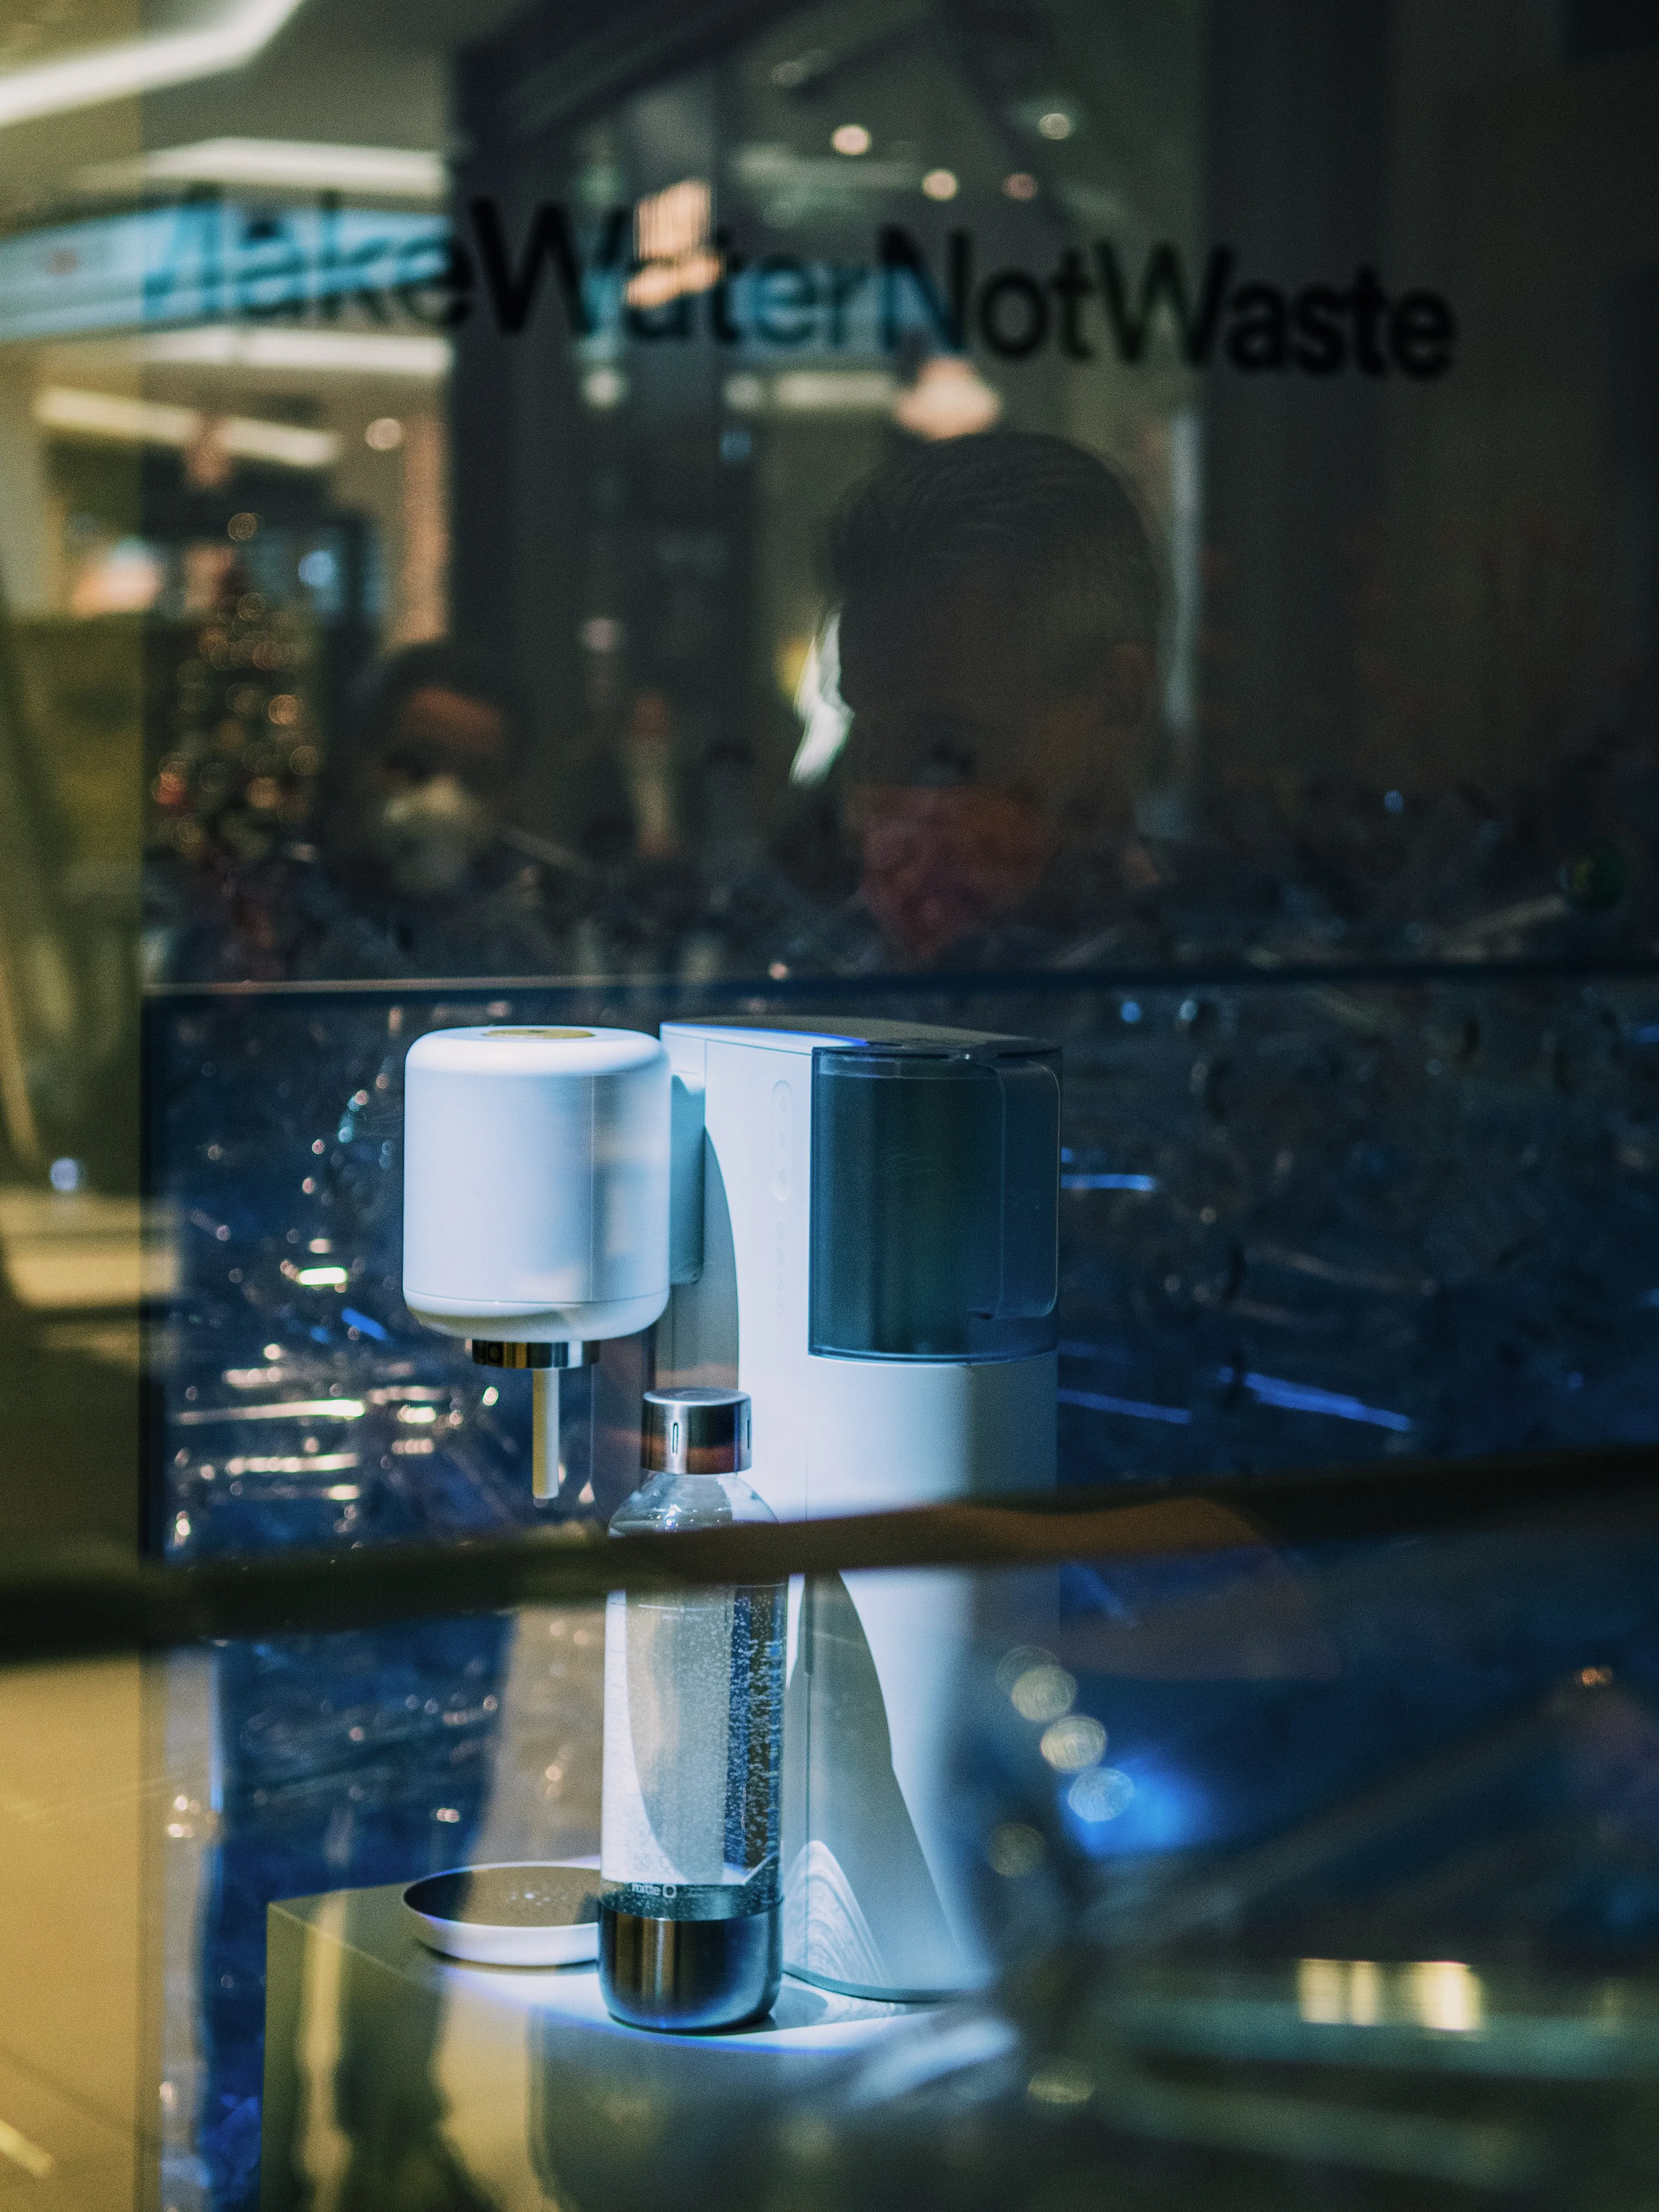 The Mitte water purifier on display in a mall